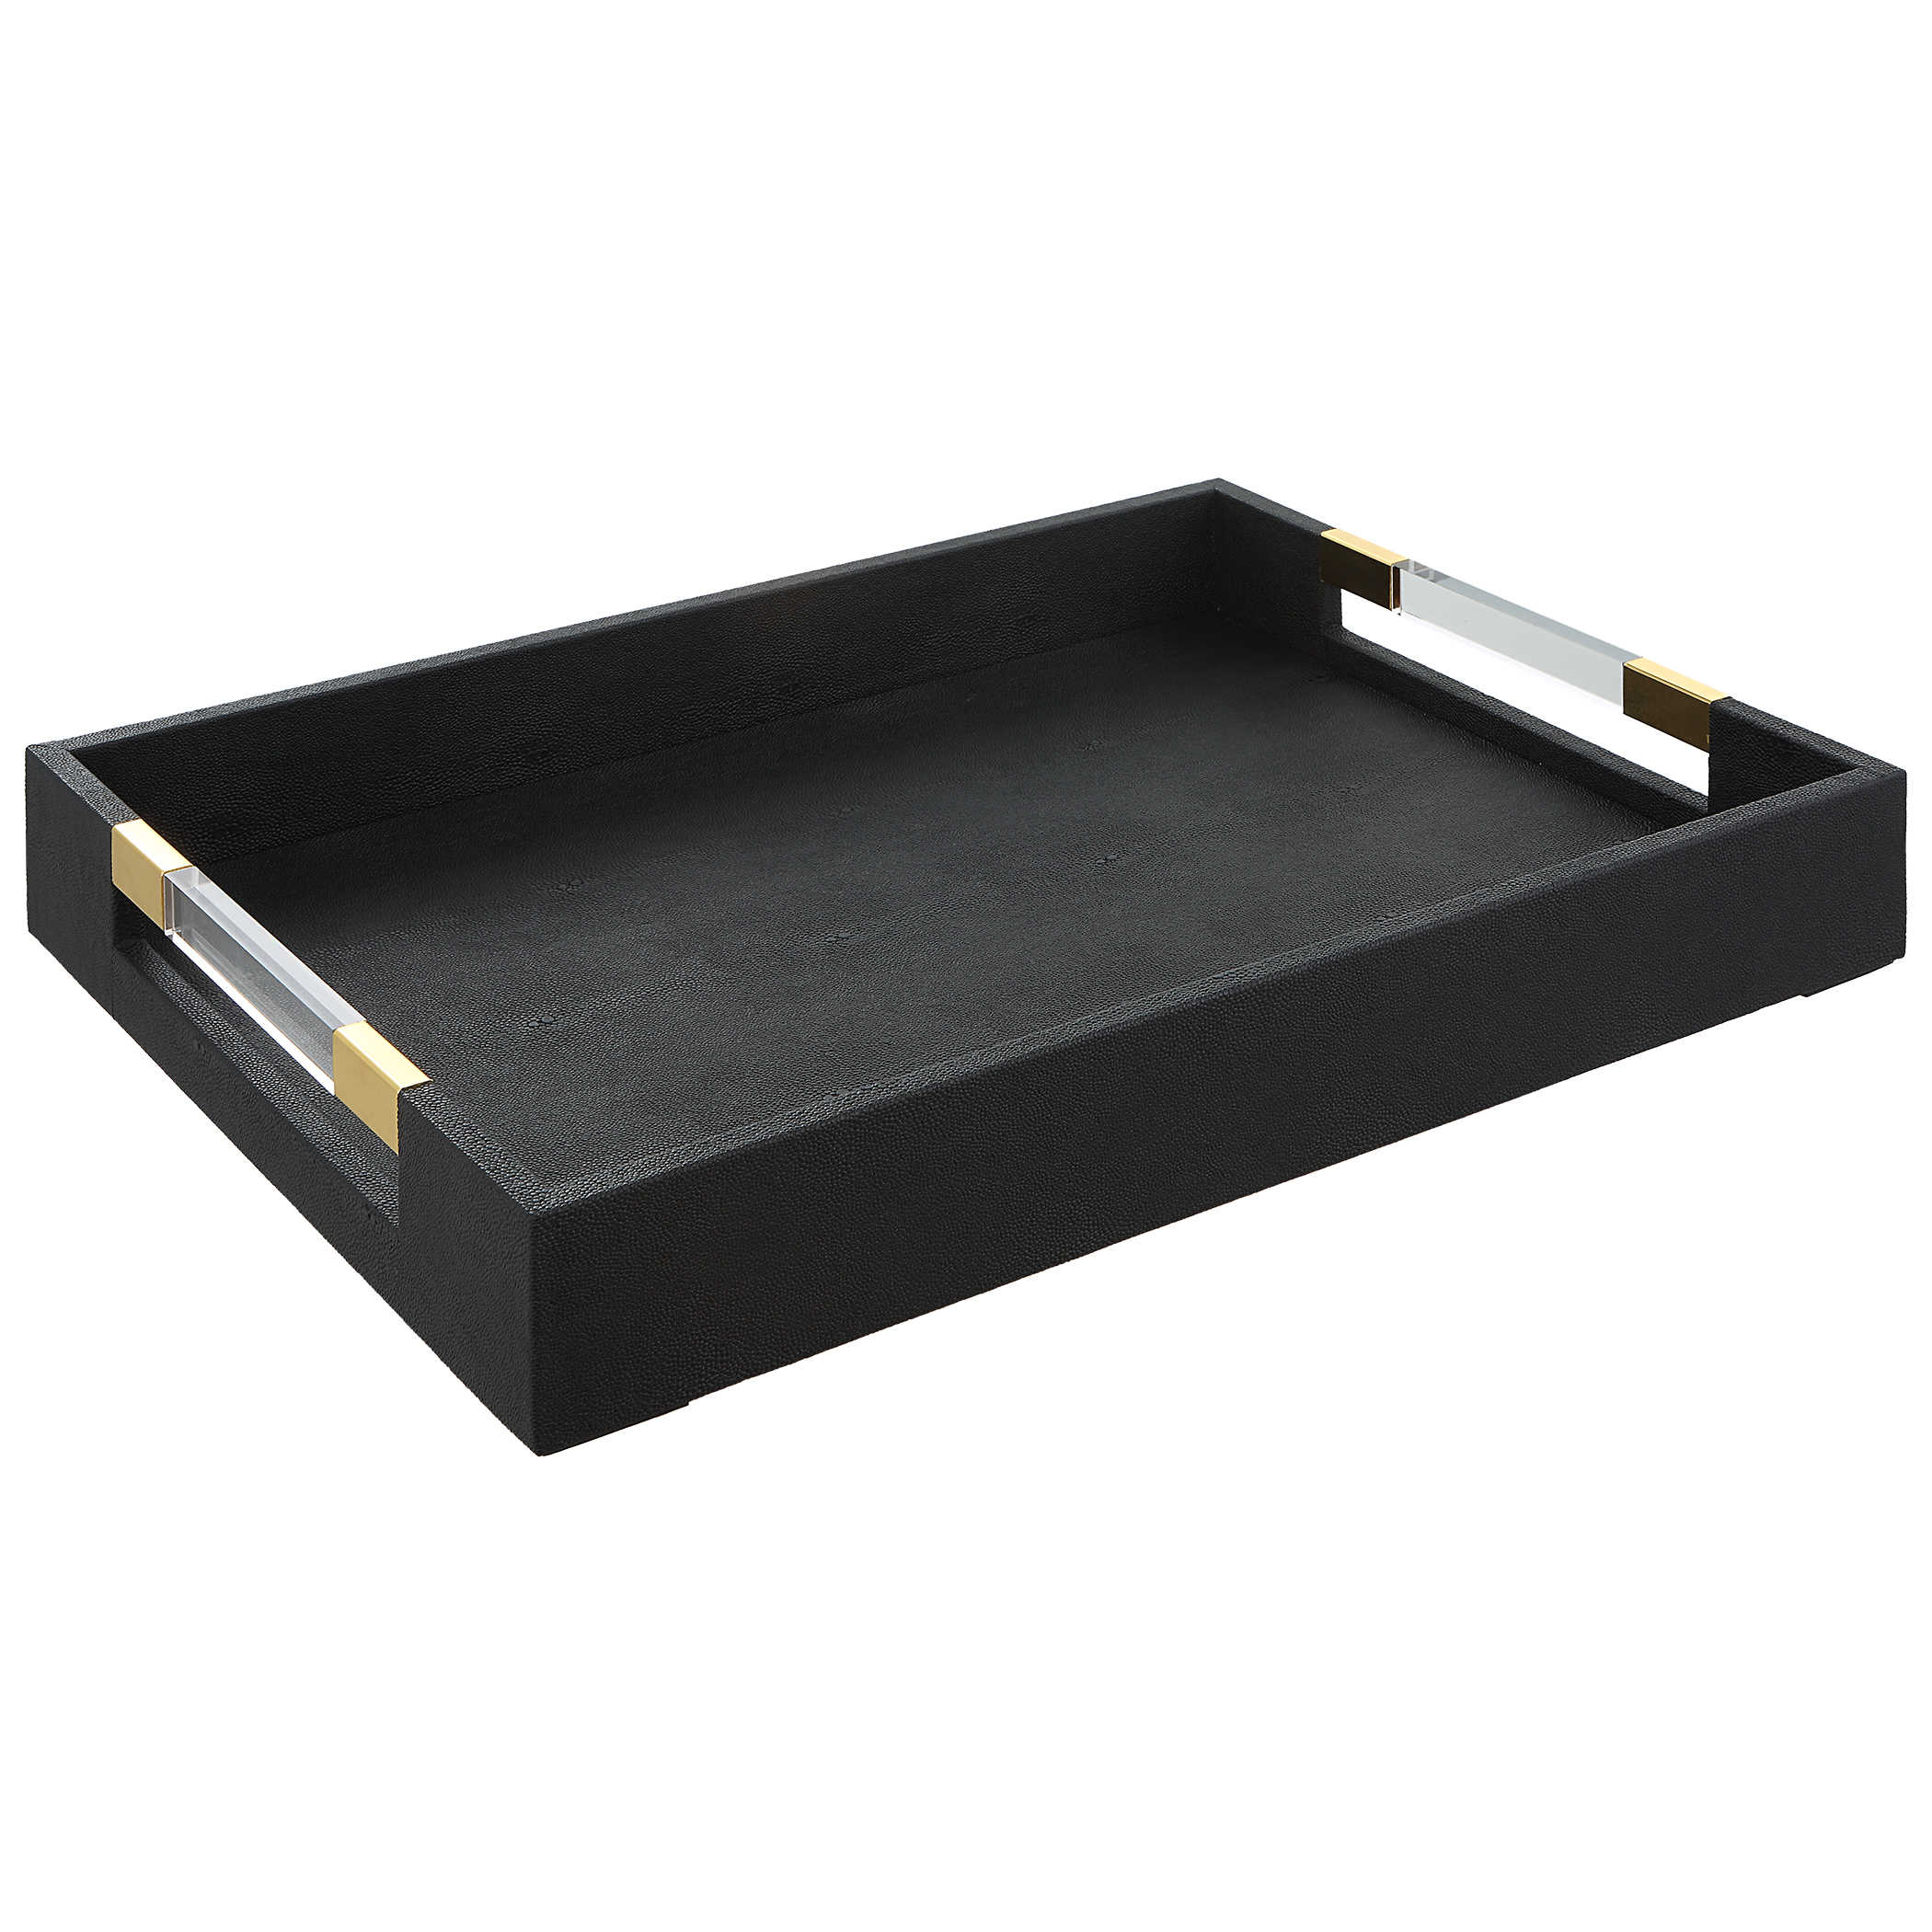 Uttermost Wessex Black Shagreen Tray Décor/Home Accent Uttermost MDF,SHARGREEN PU AND HARDWARE  